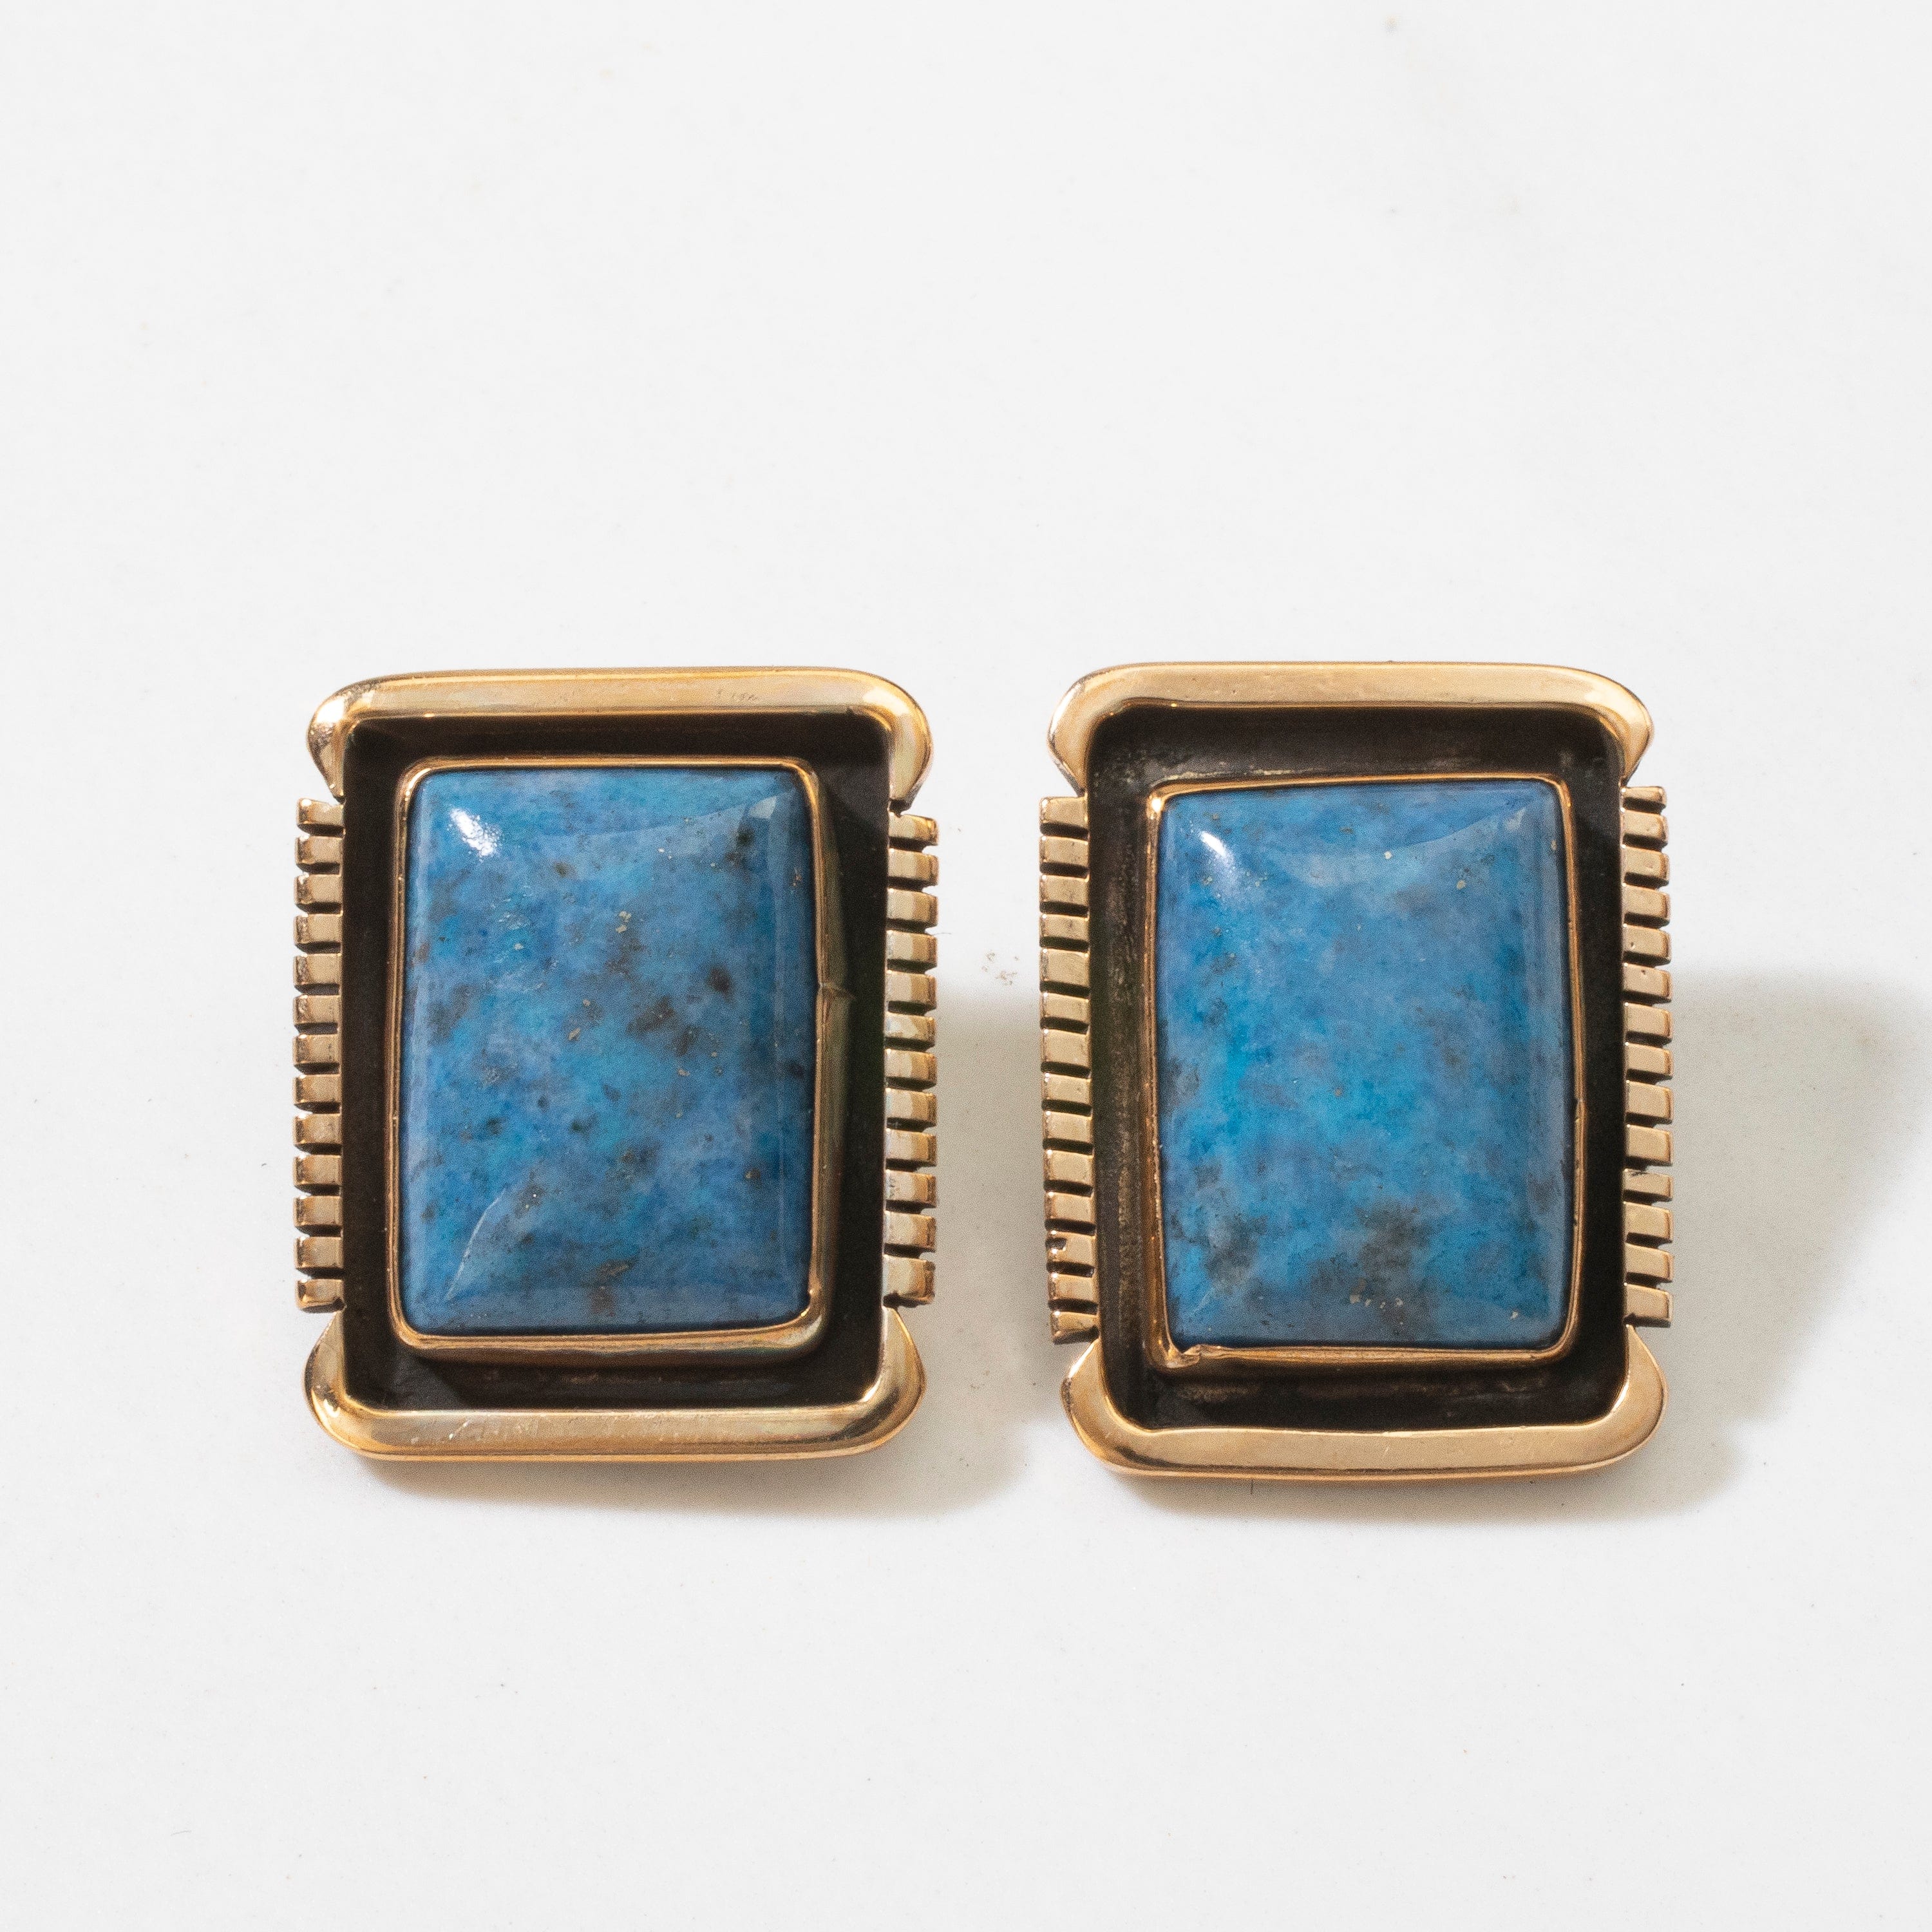 Kalifano Native American Jewelry Denim Lapis Rectangular Navajo USA Native American Made 925 Sterling Silver & Gold Filled Earrings with Clip On Backing NAE500.013